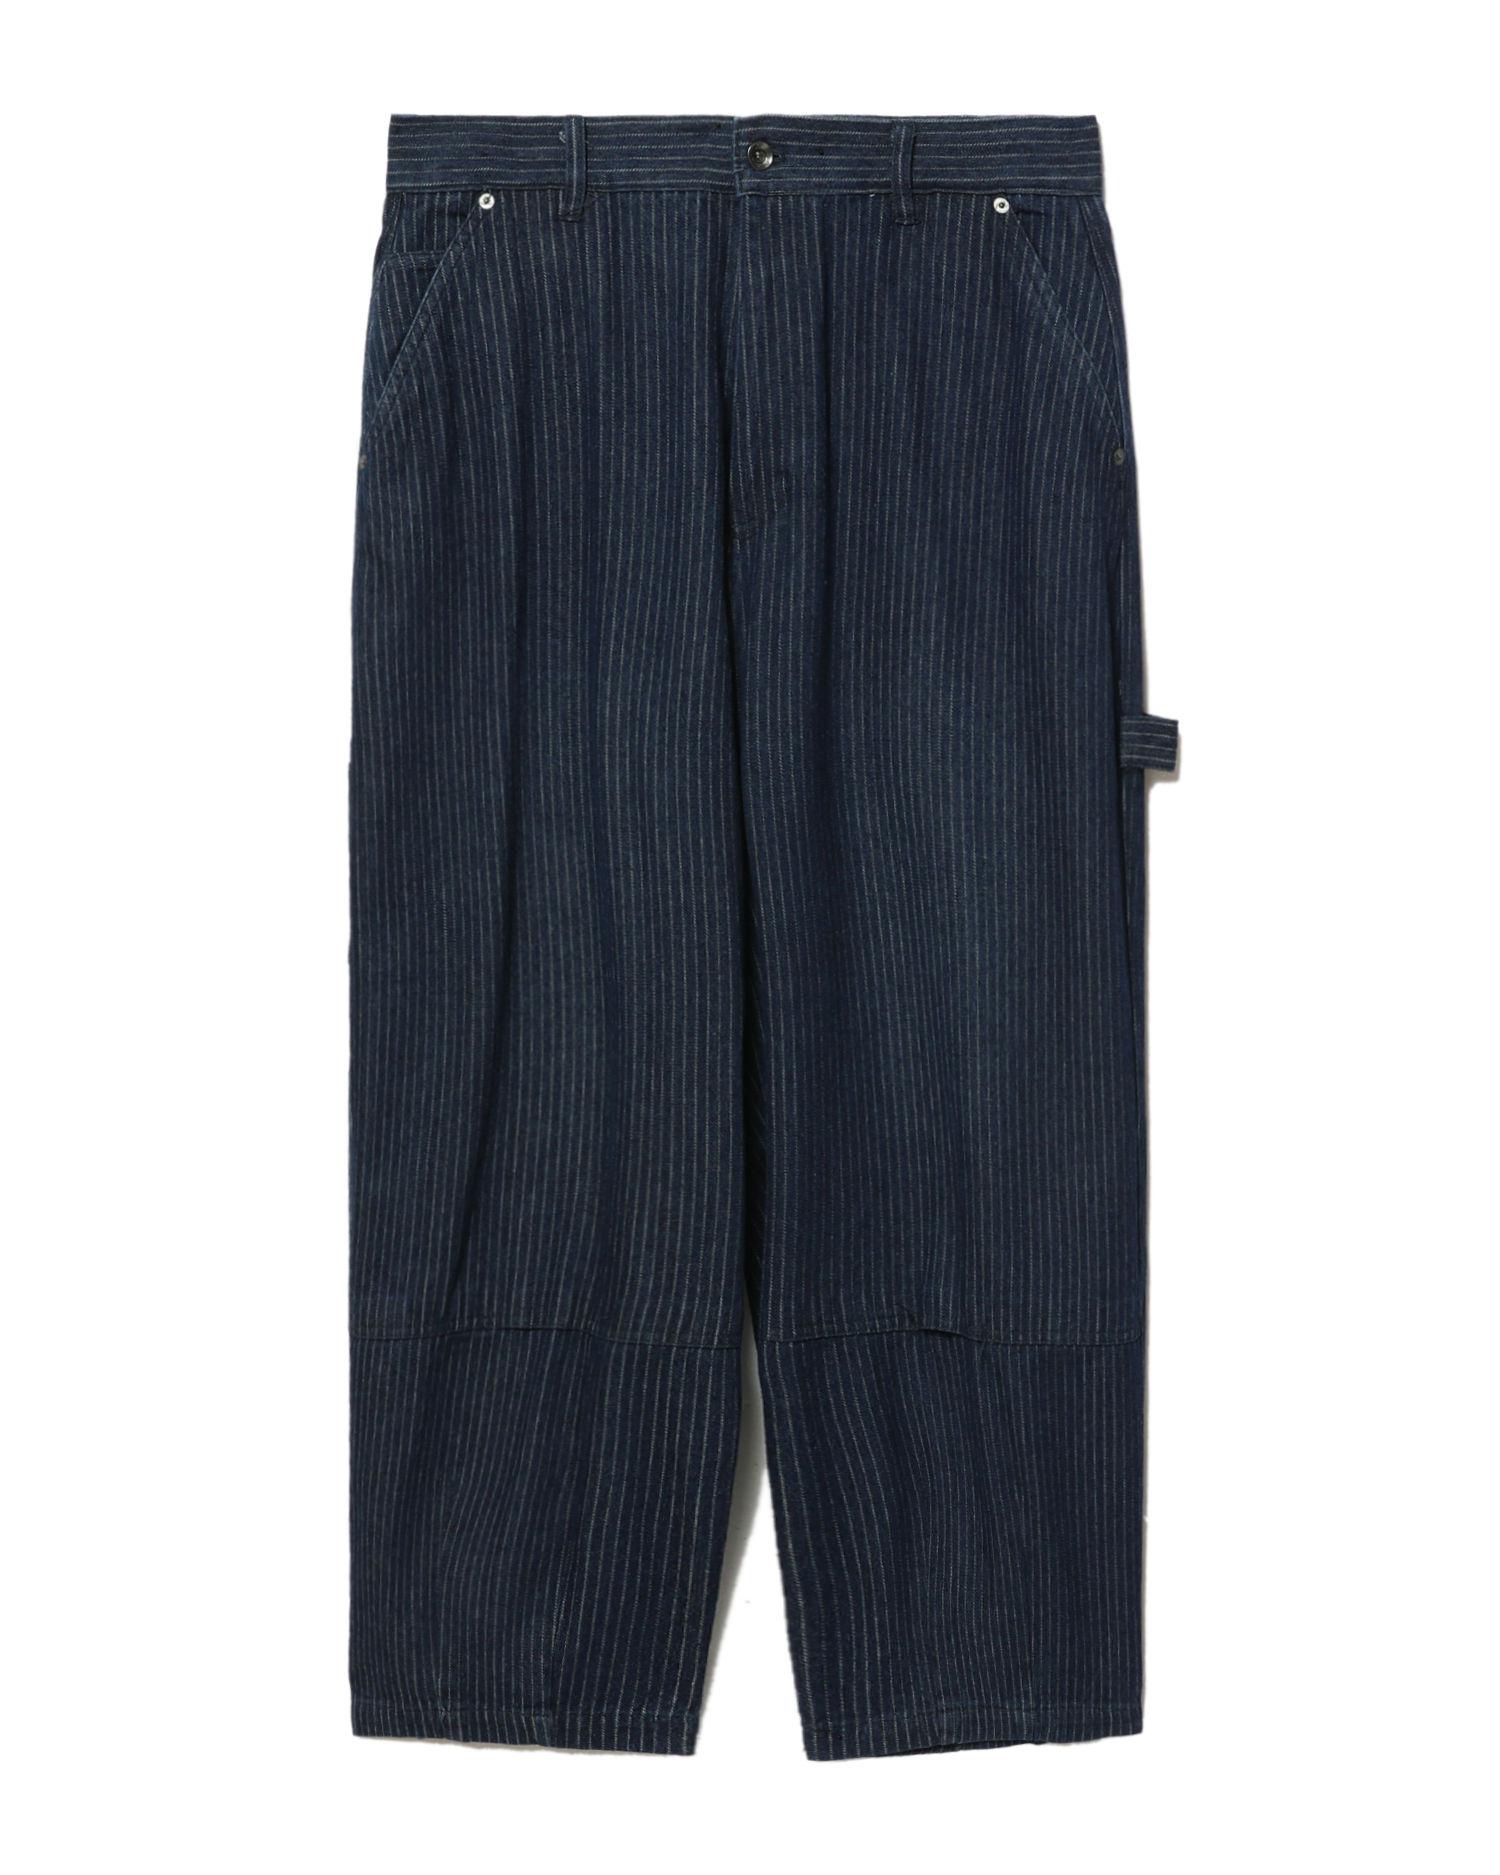 Pinstripe wide-leg cargo pants by AFTERMATHS